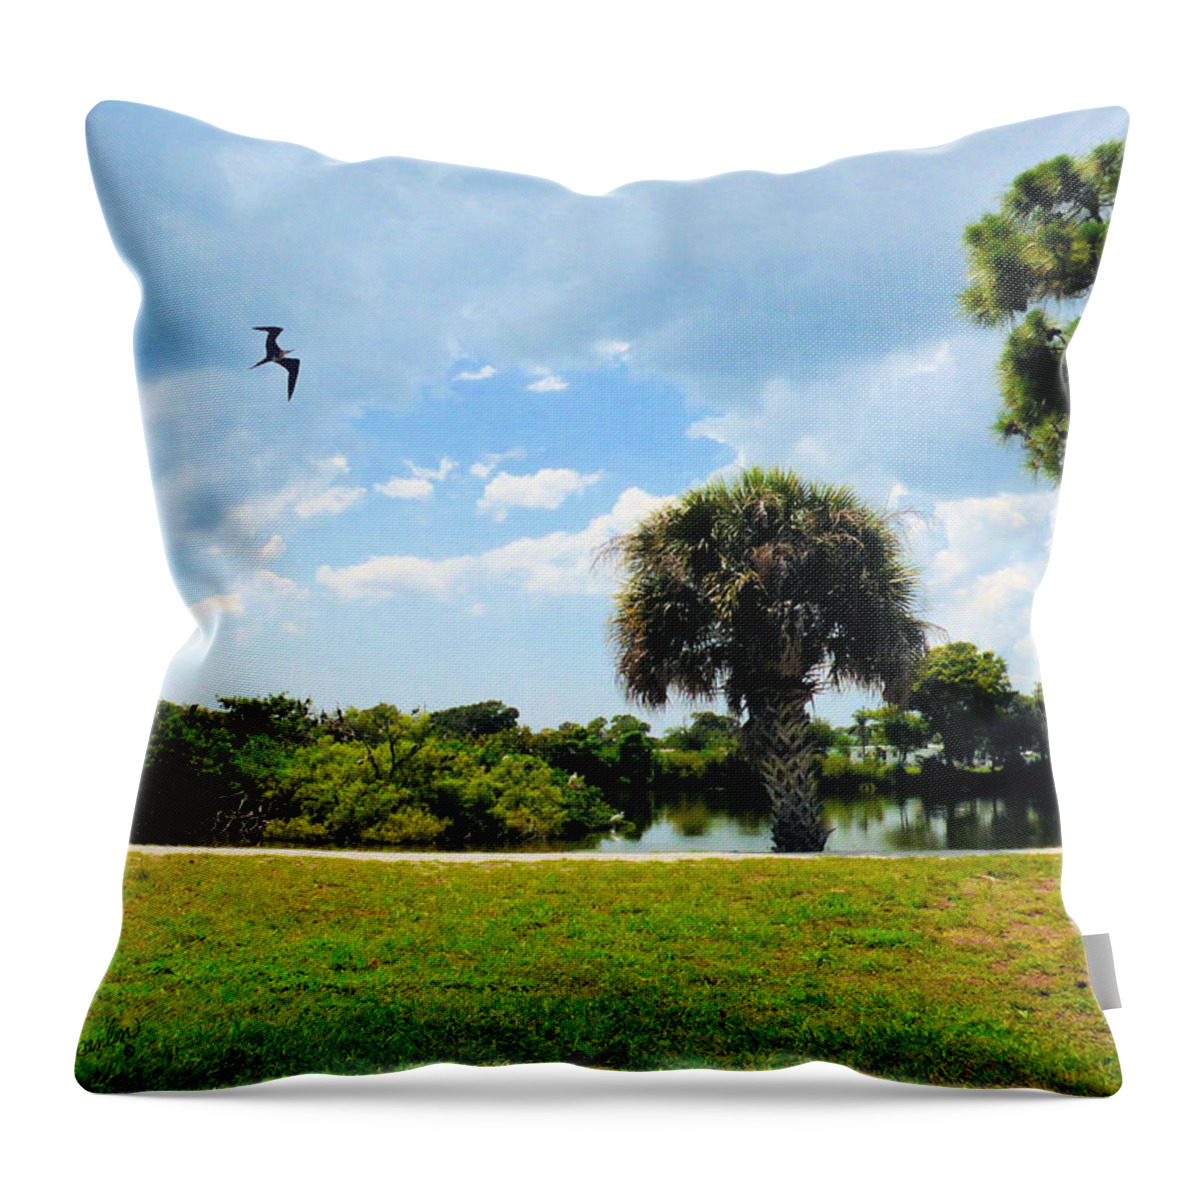 Rookery Throw Pillow featuring the photograph The Rookery by Rosalie Scanlon